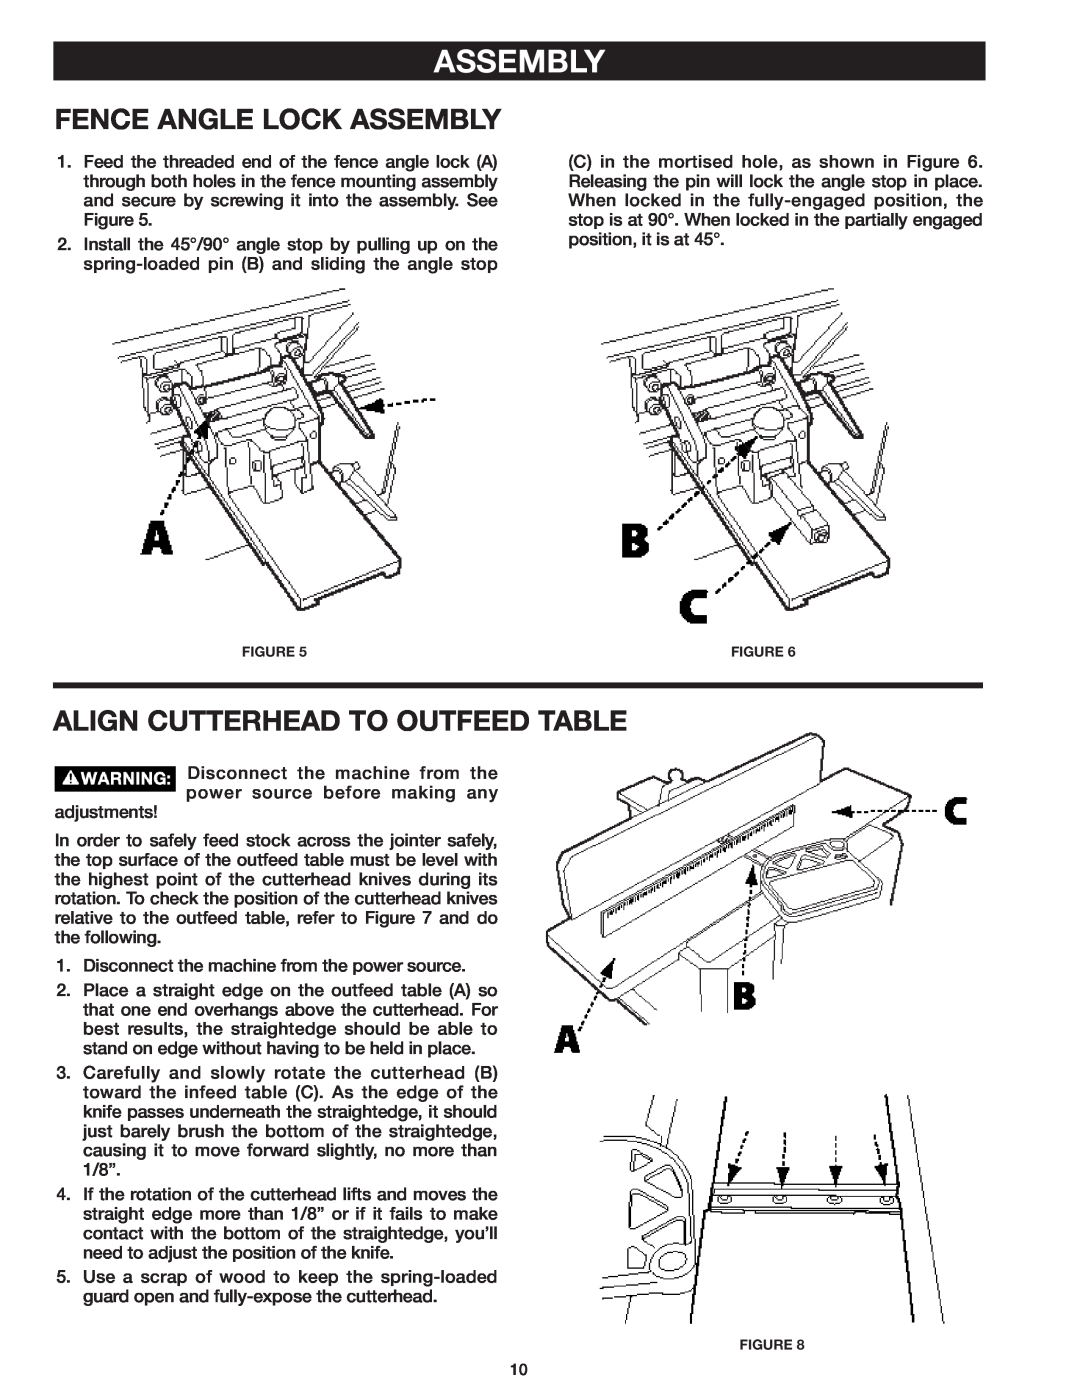 Delta 37-071 instruction manual Fence Angle Lock Assembly, Align Cutterhead To Outfeed Table 